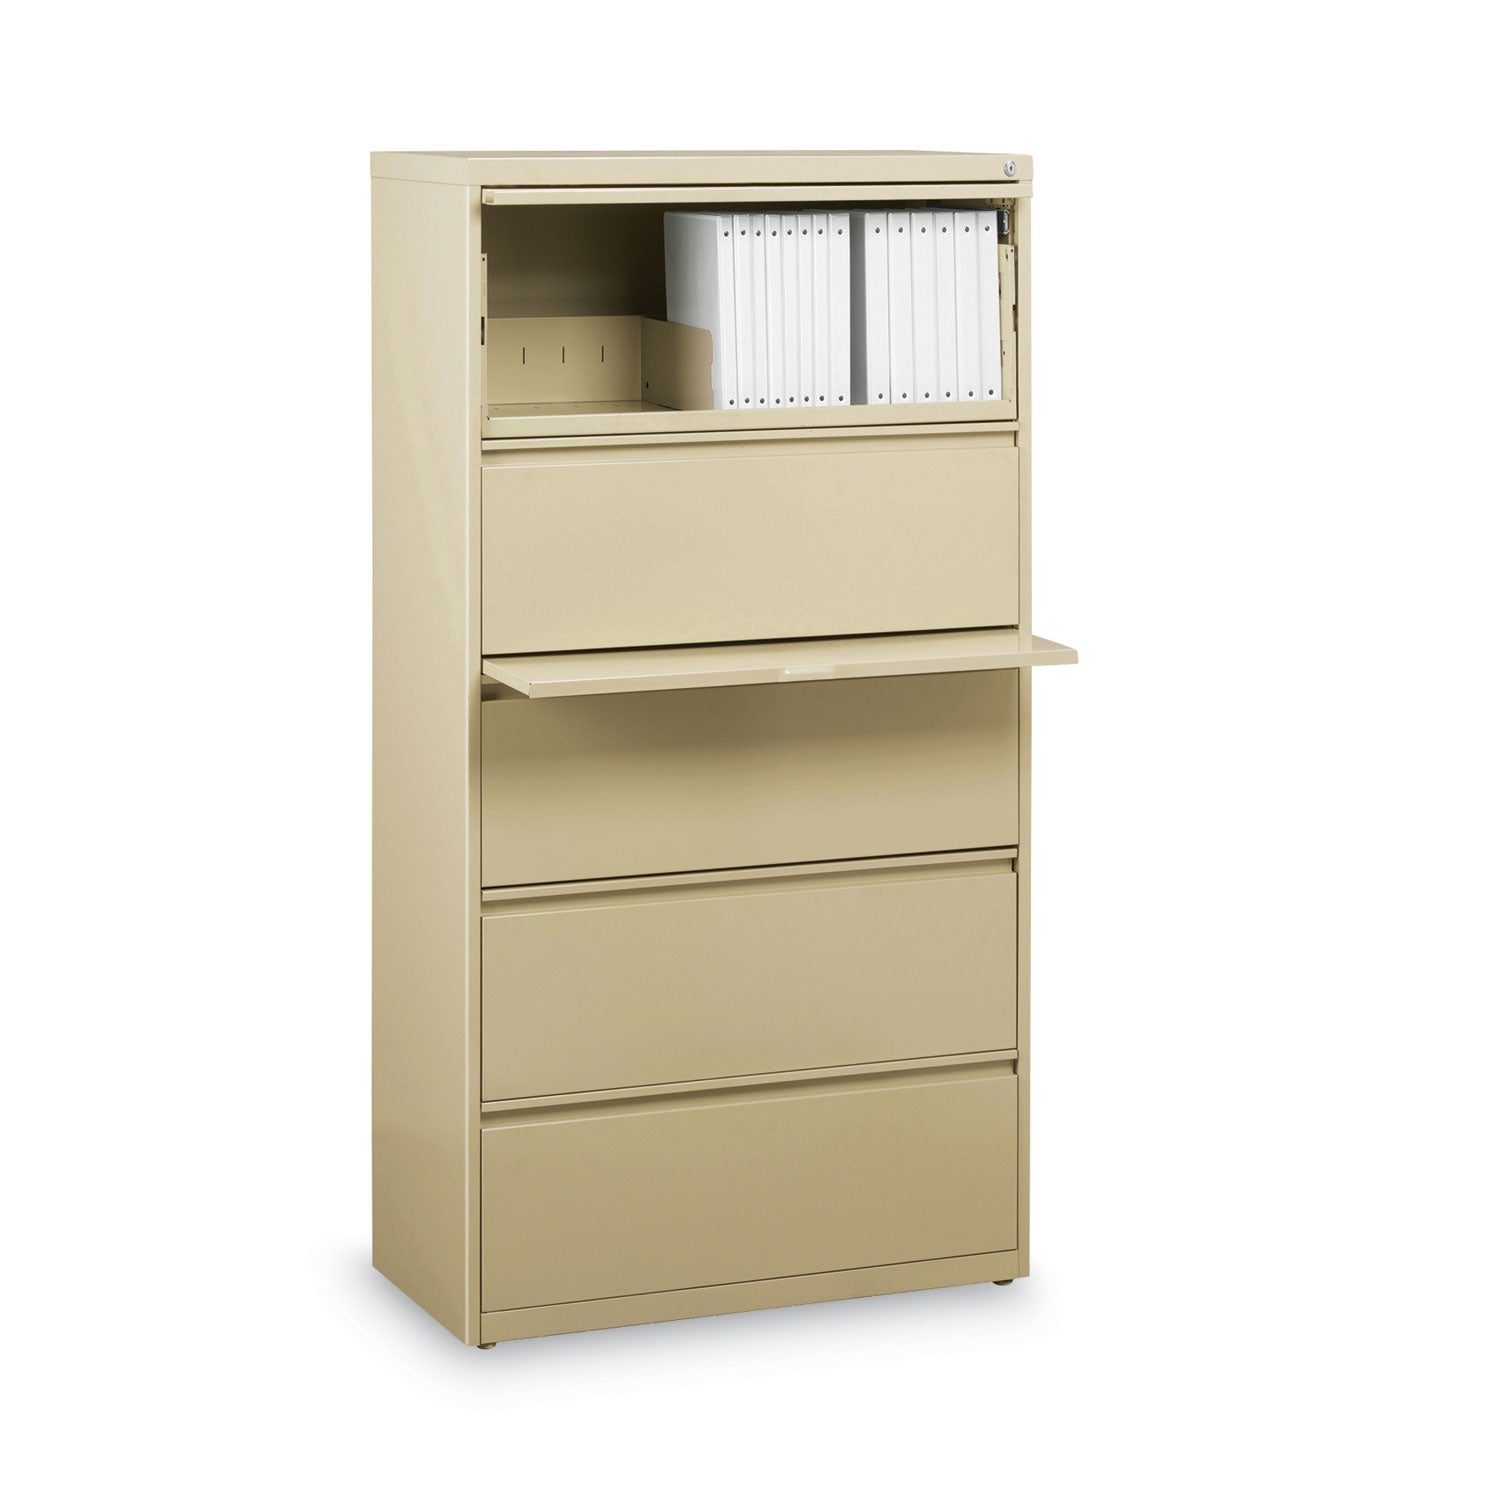 lateral-file-cabinet-5-letter-legal-a4-size-file-drawers-putty-30-x-1862-x-6762_hid14979 - 4